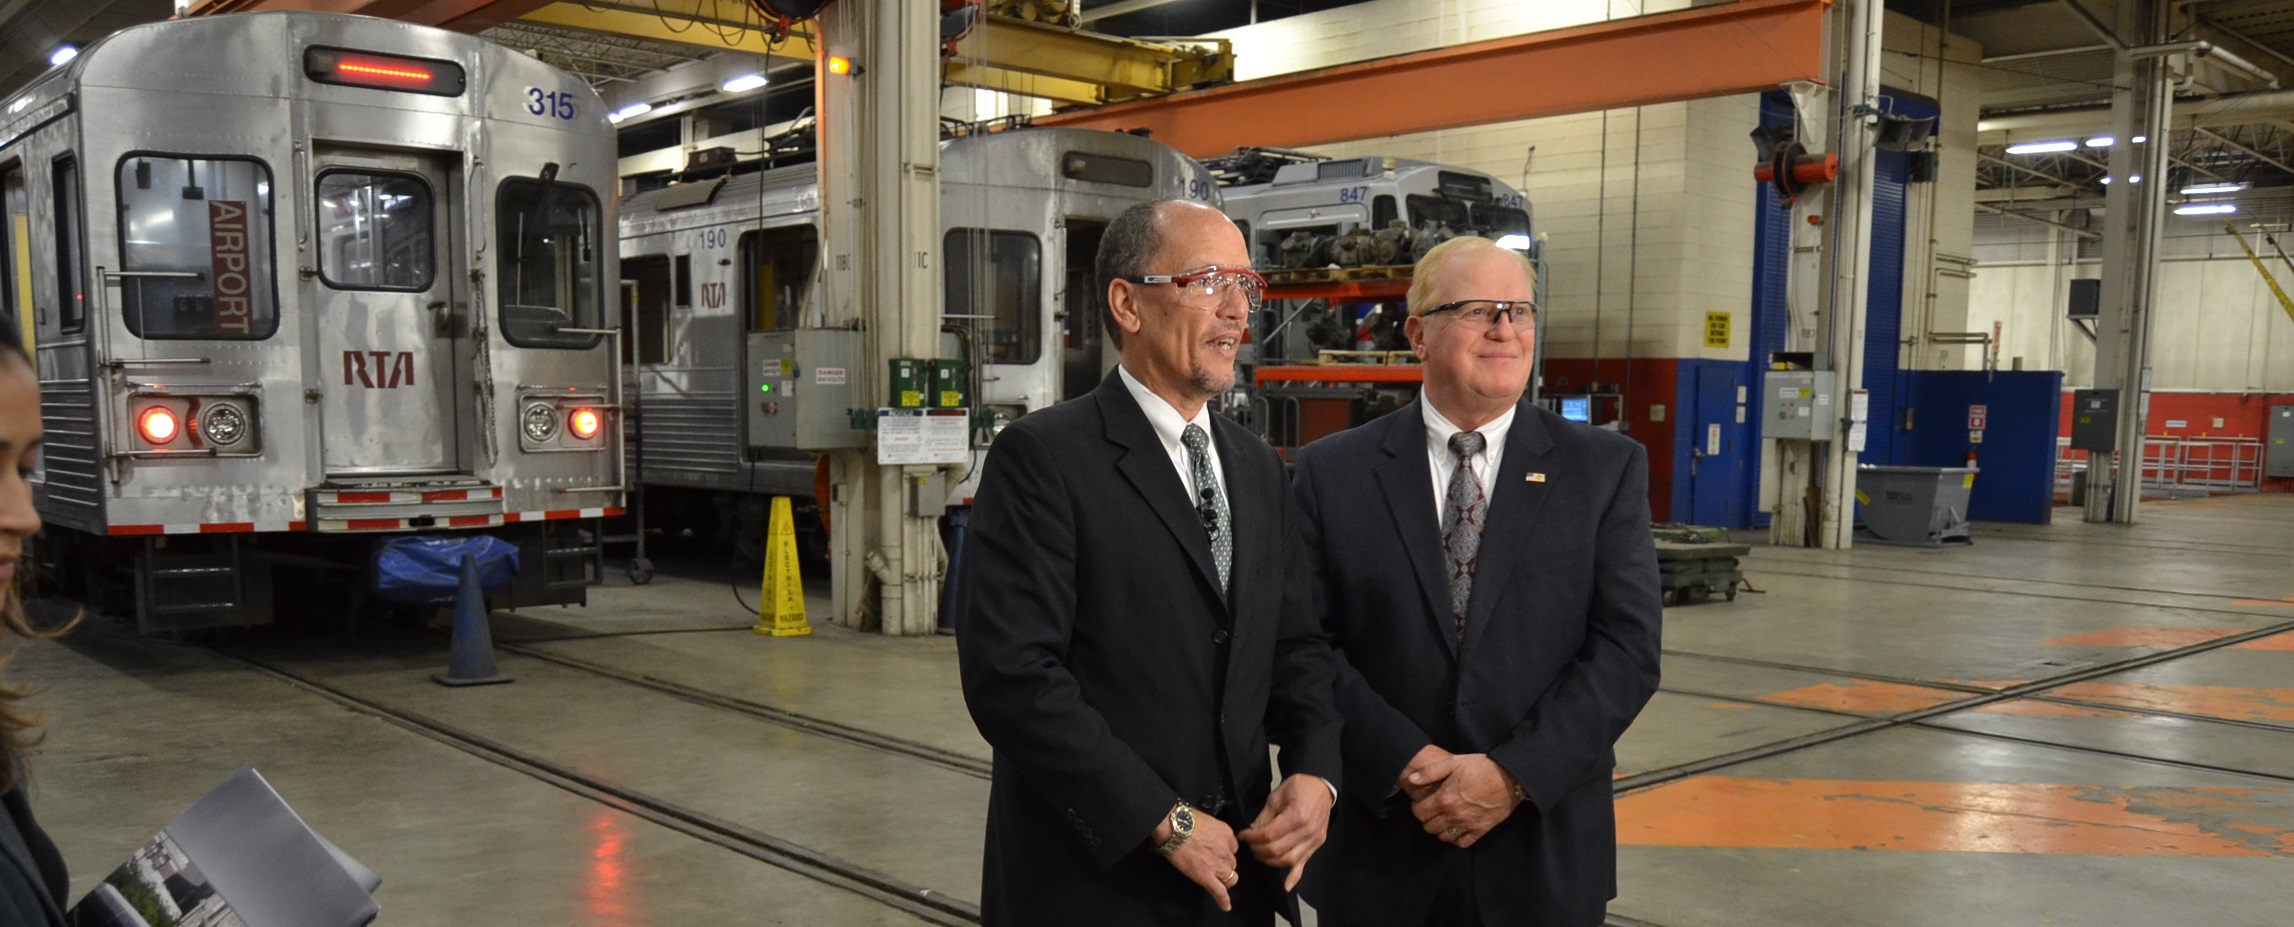  Federal officials praise RTA for job training and workforce development